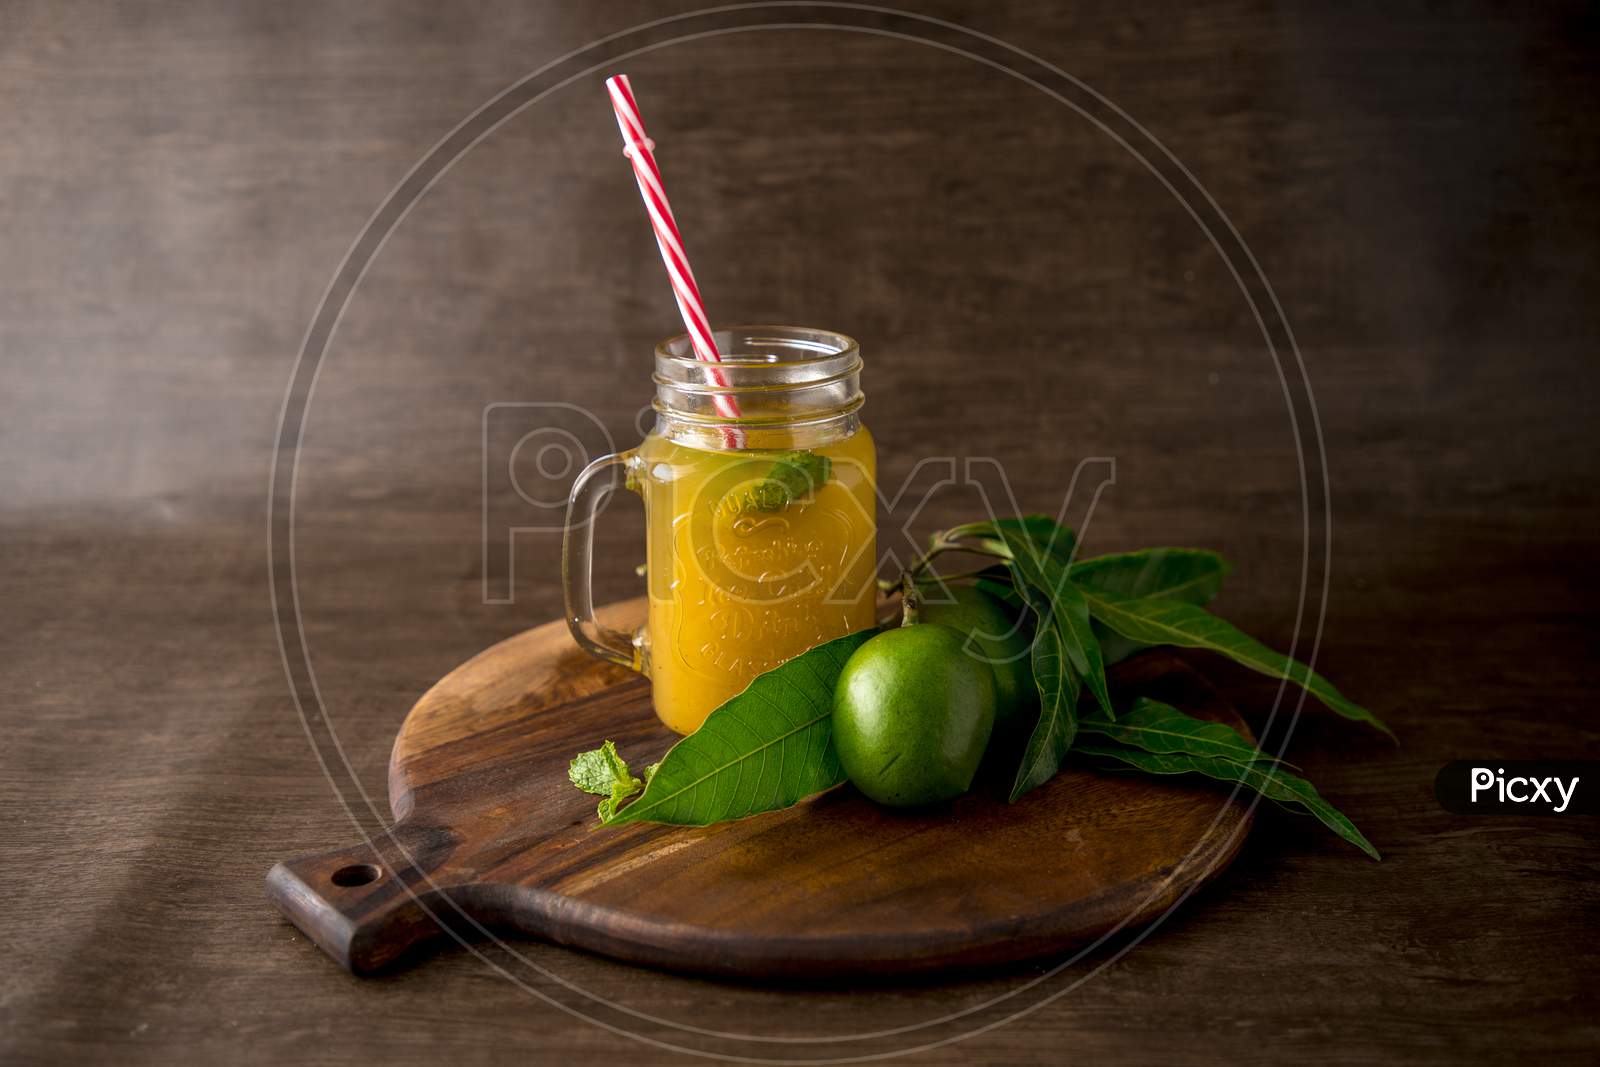 Kairi panha or Raw mango drink  is a traditional indian summer beverage served in glass